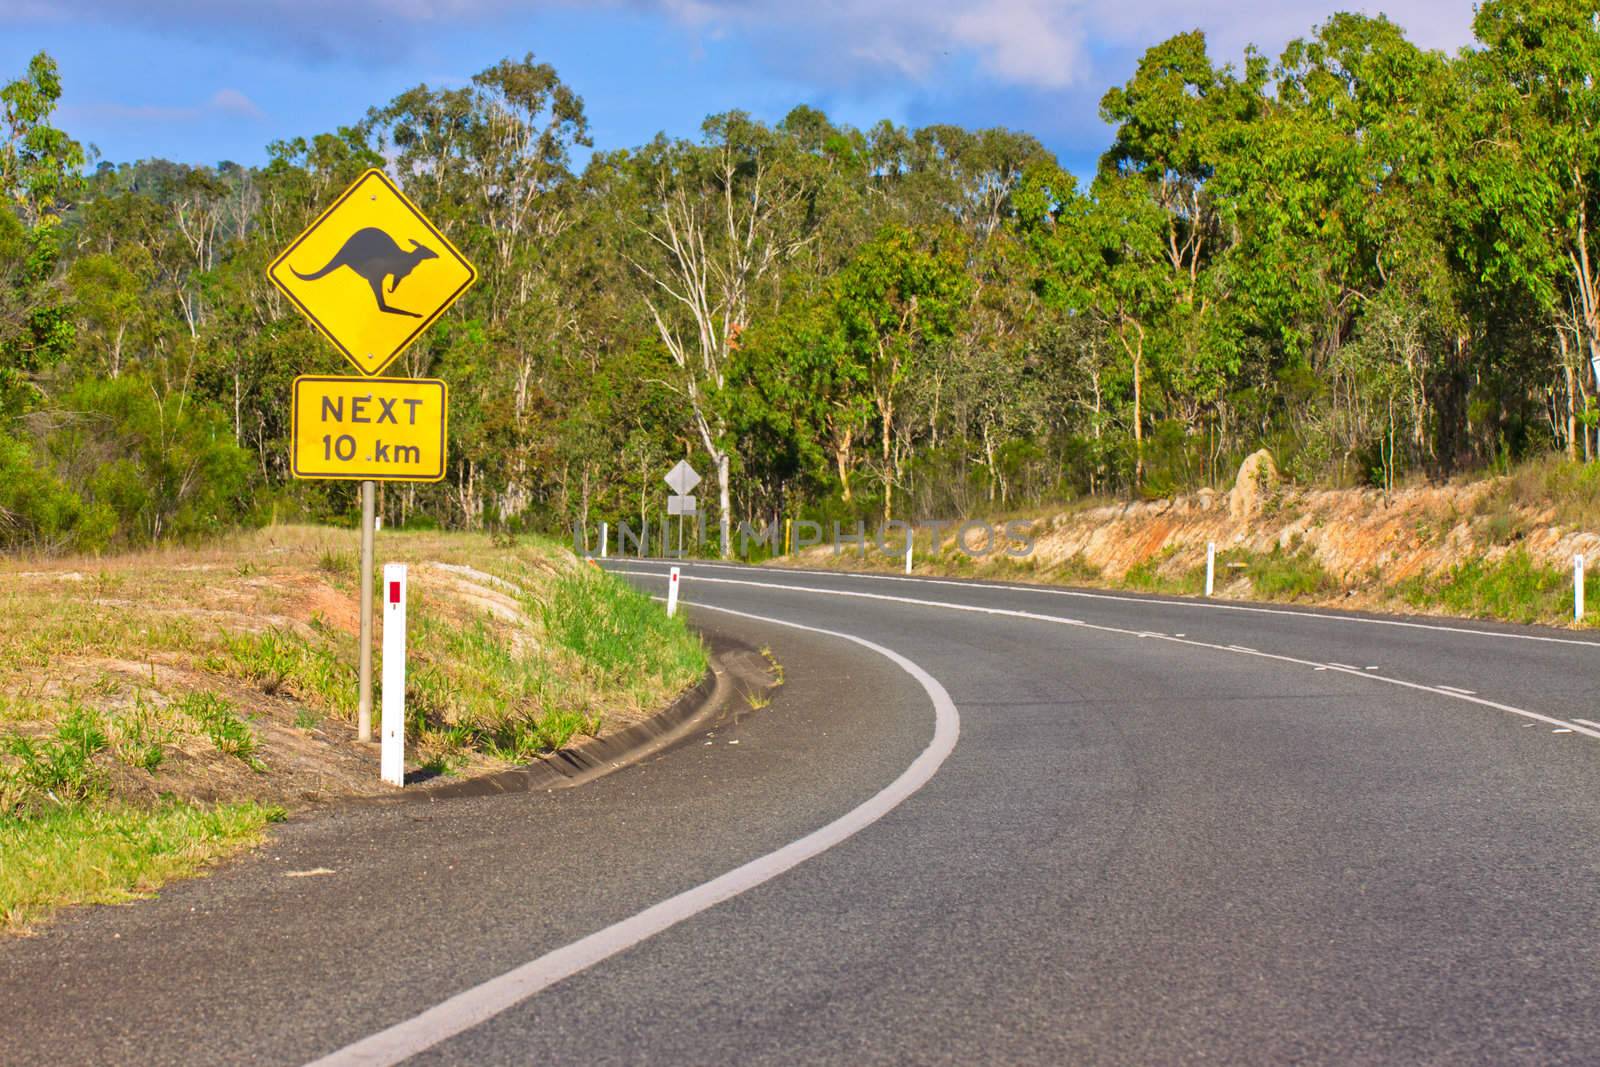 Kangaroo road warning sign on a country road by Jaykayl